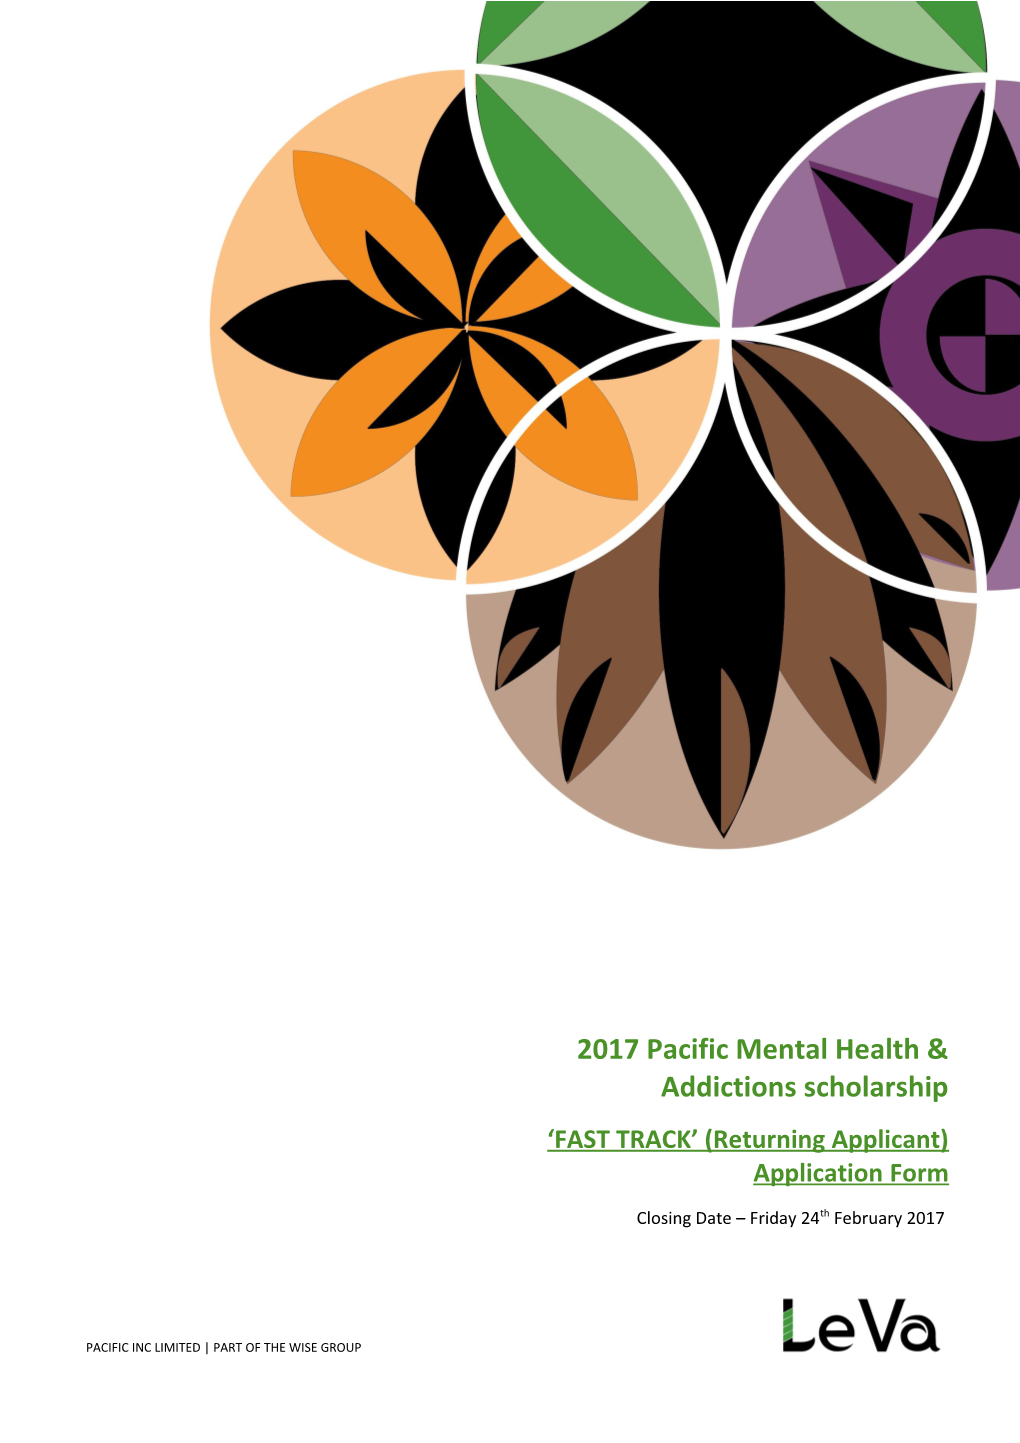 Pacific Mental Health and Addiction Scholarship: Value, Tenure and Requirements